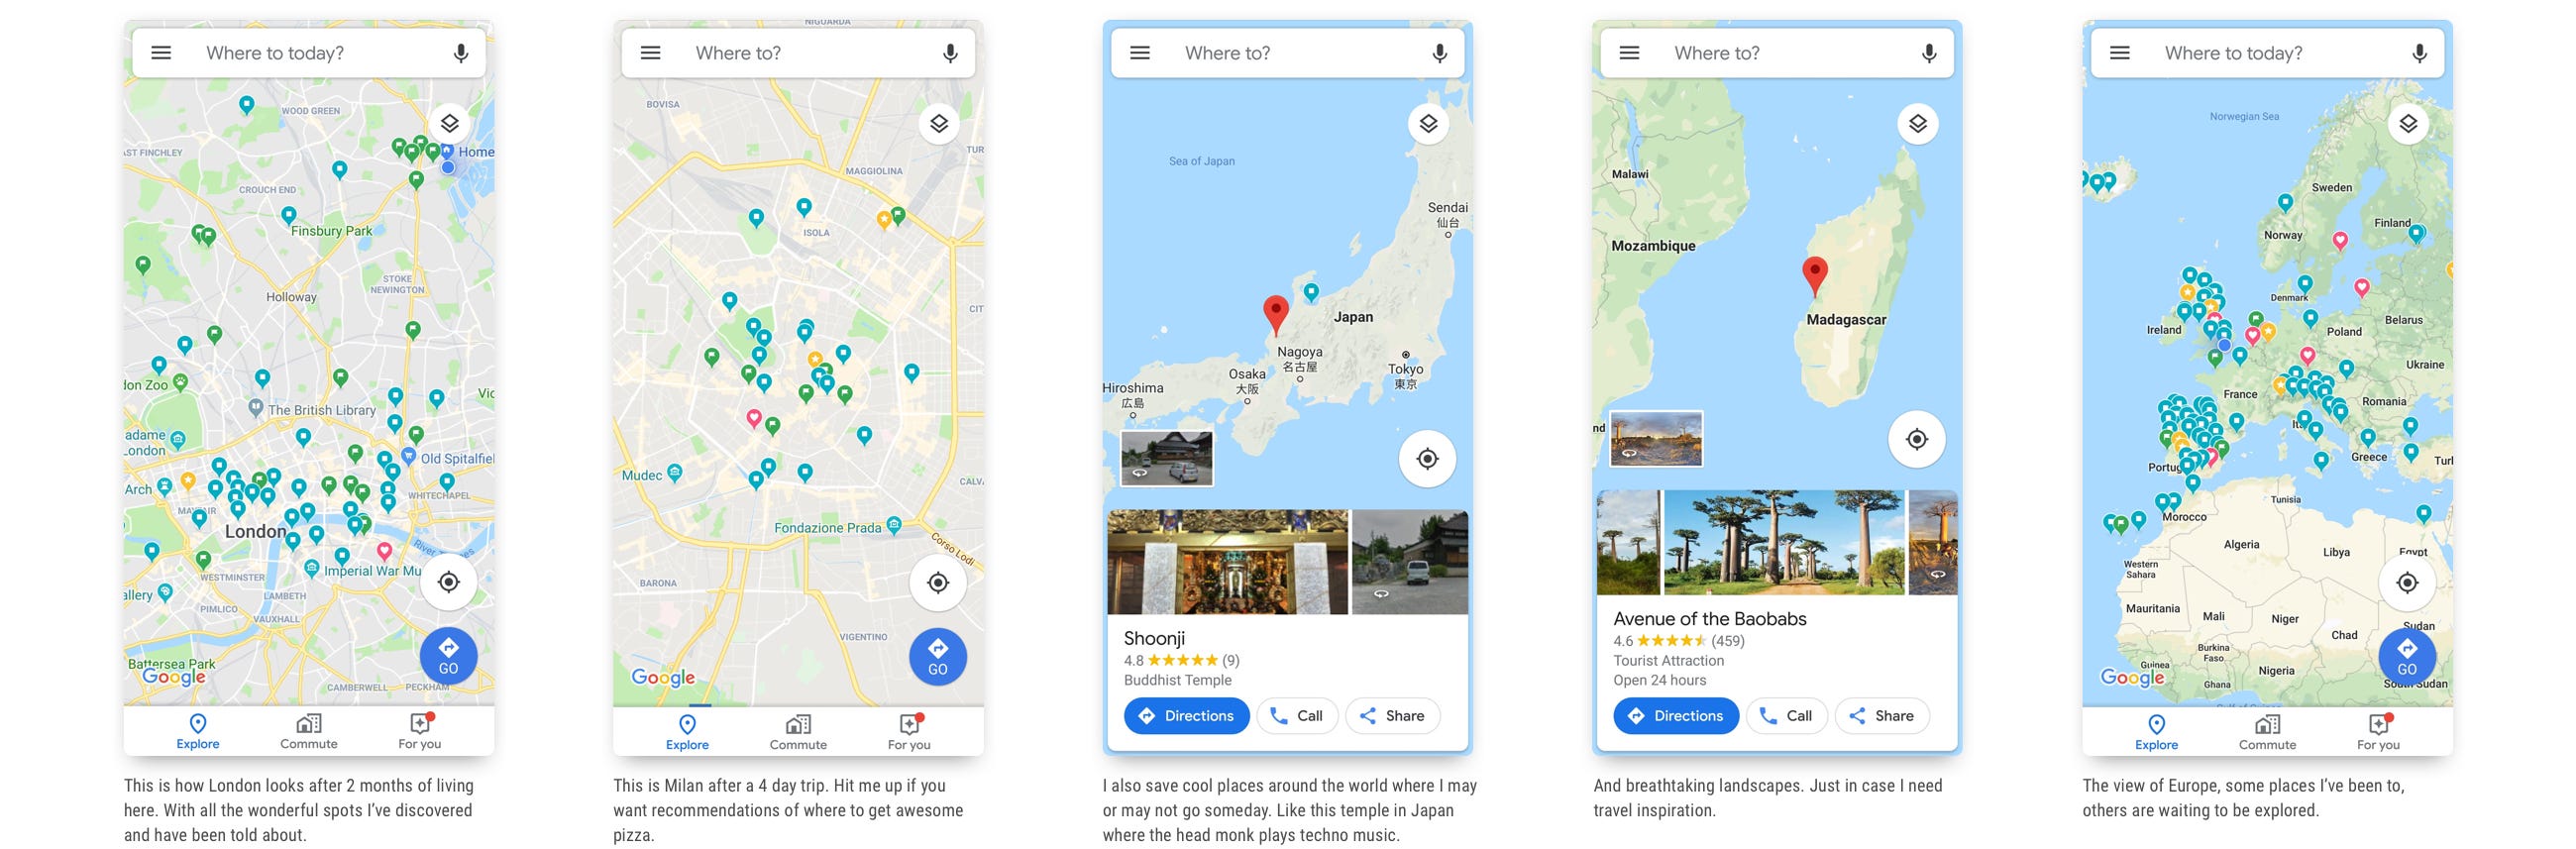 How To Find My Saved Locations In Google Maps Web Applications